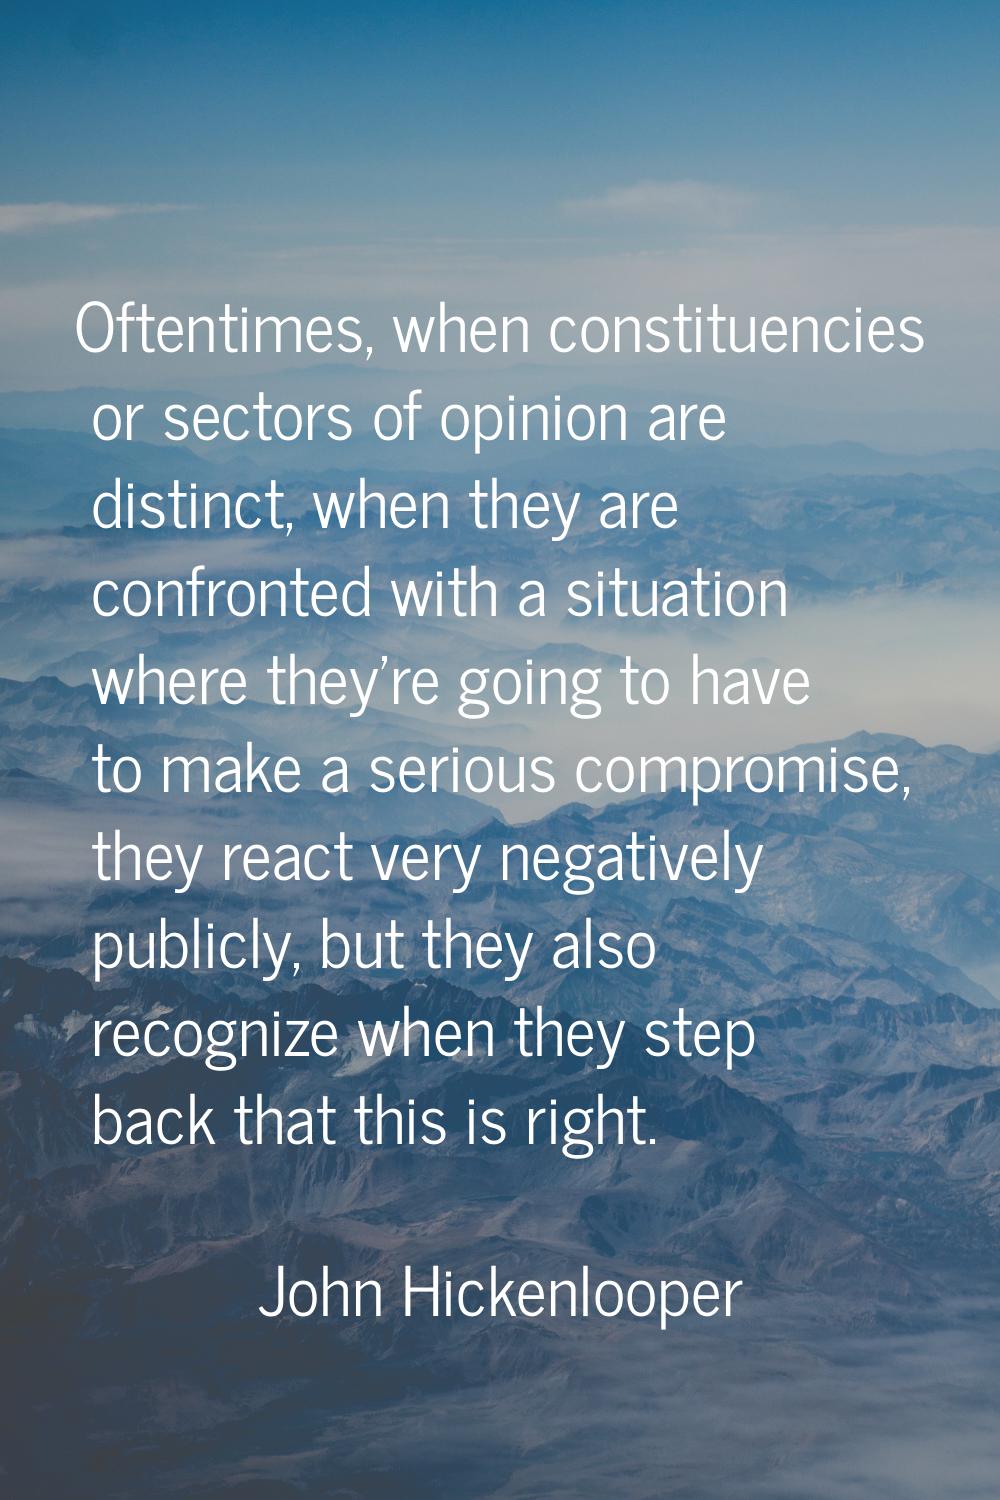 Oftentimes, when constituencies or sectors of opinion are distinct, when they are confronted with a